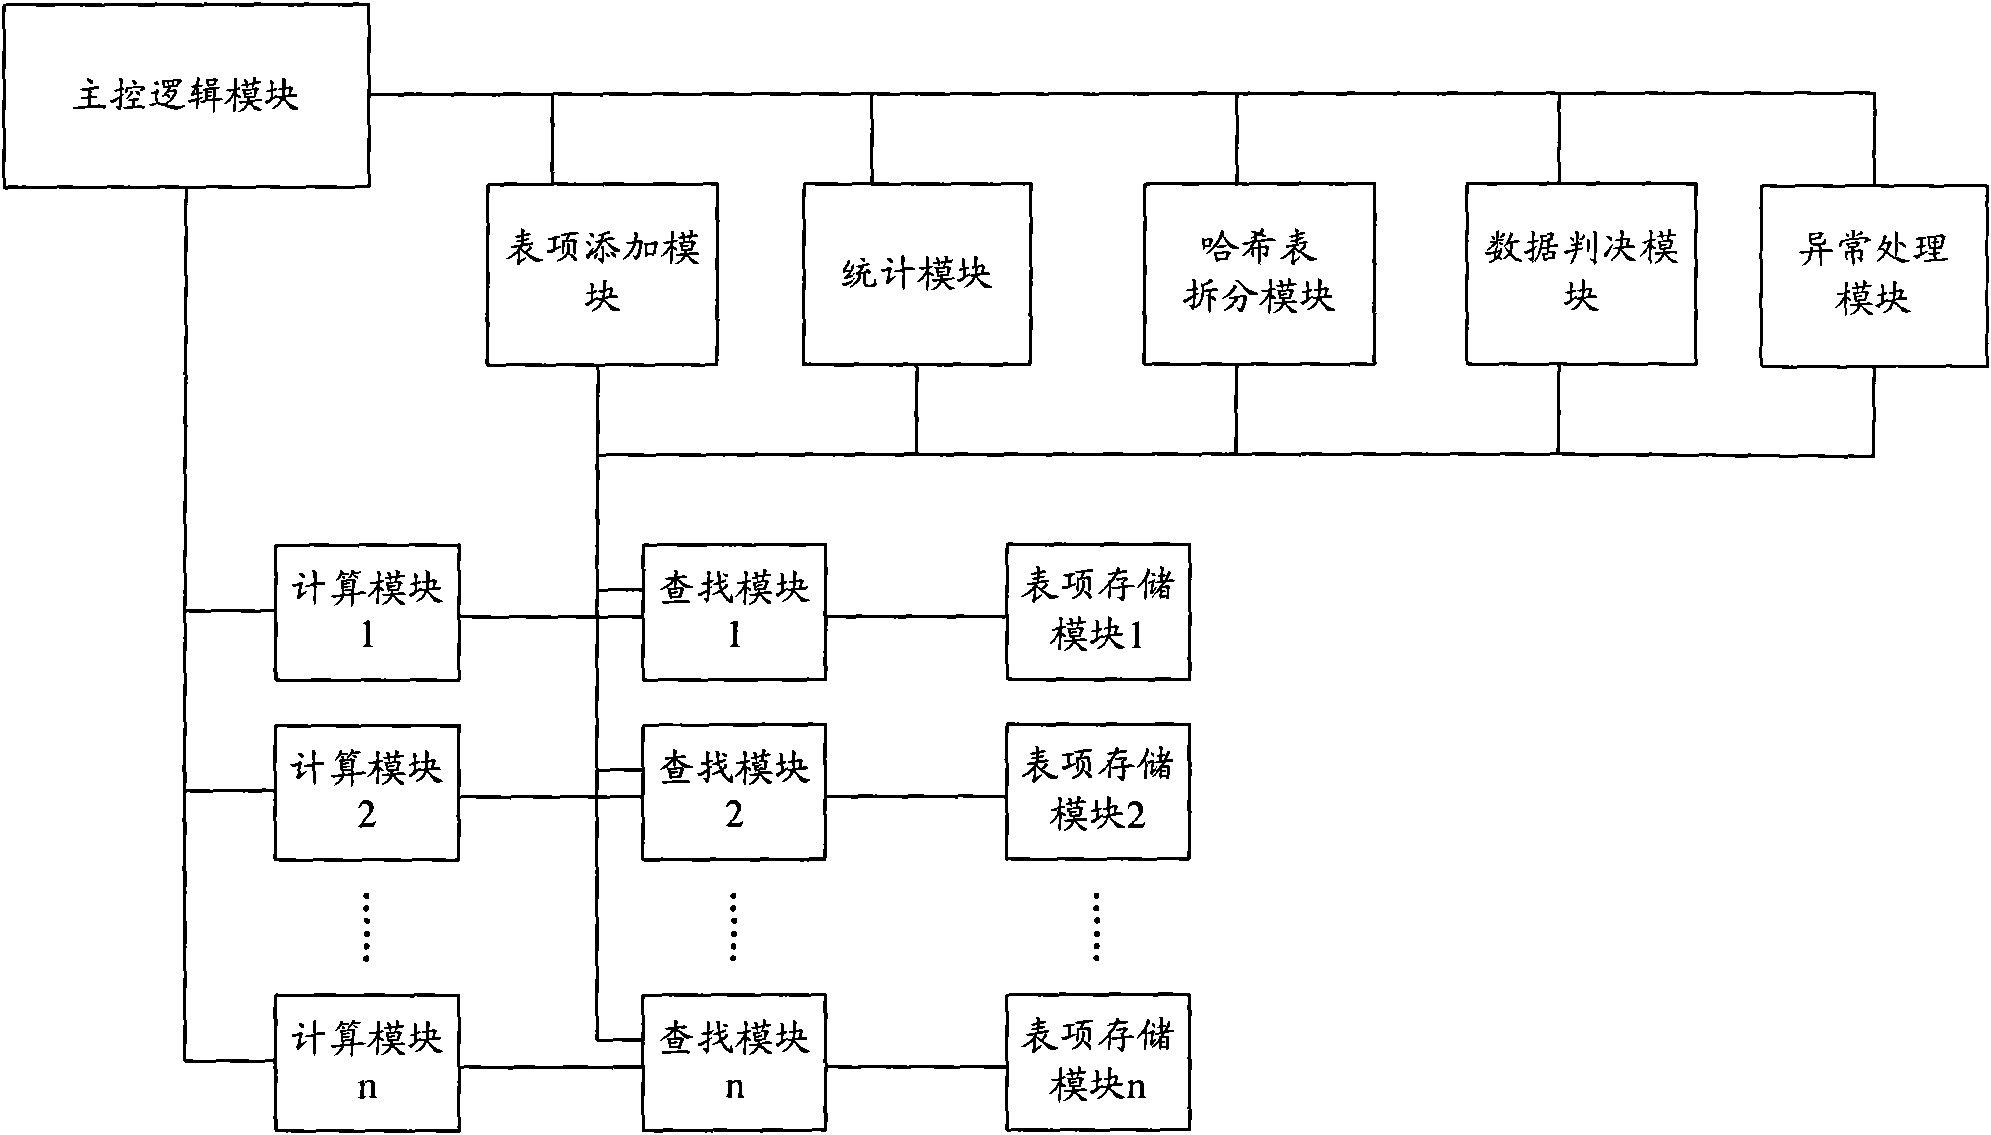 Apparatus and method for hash table storage, searching